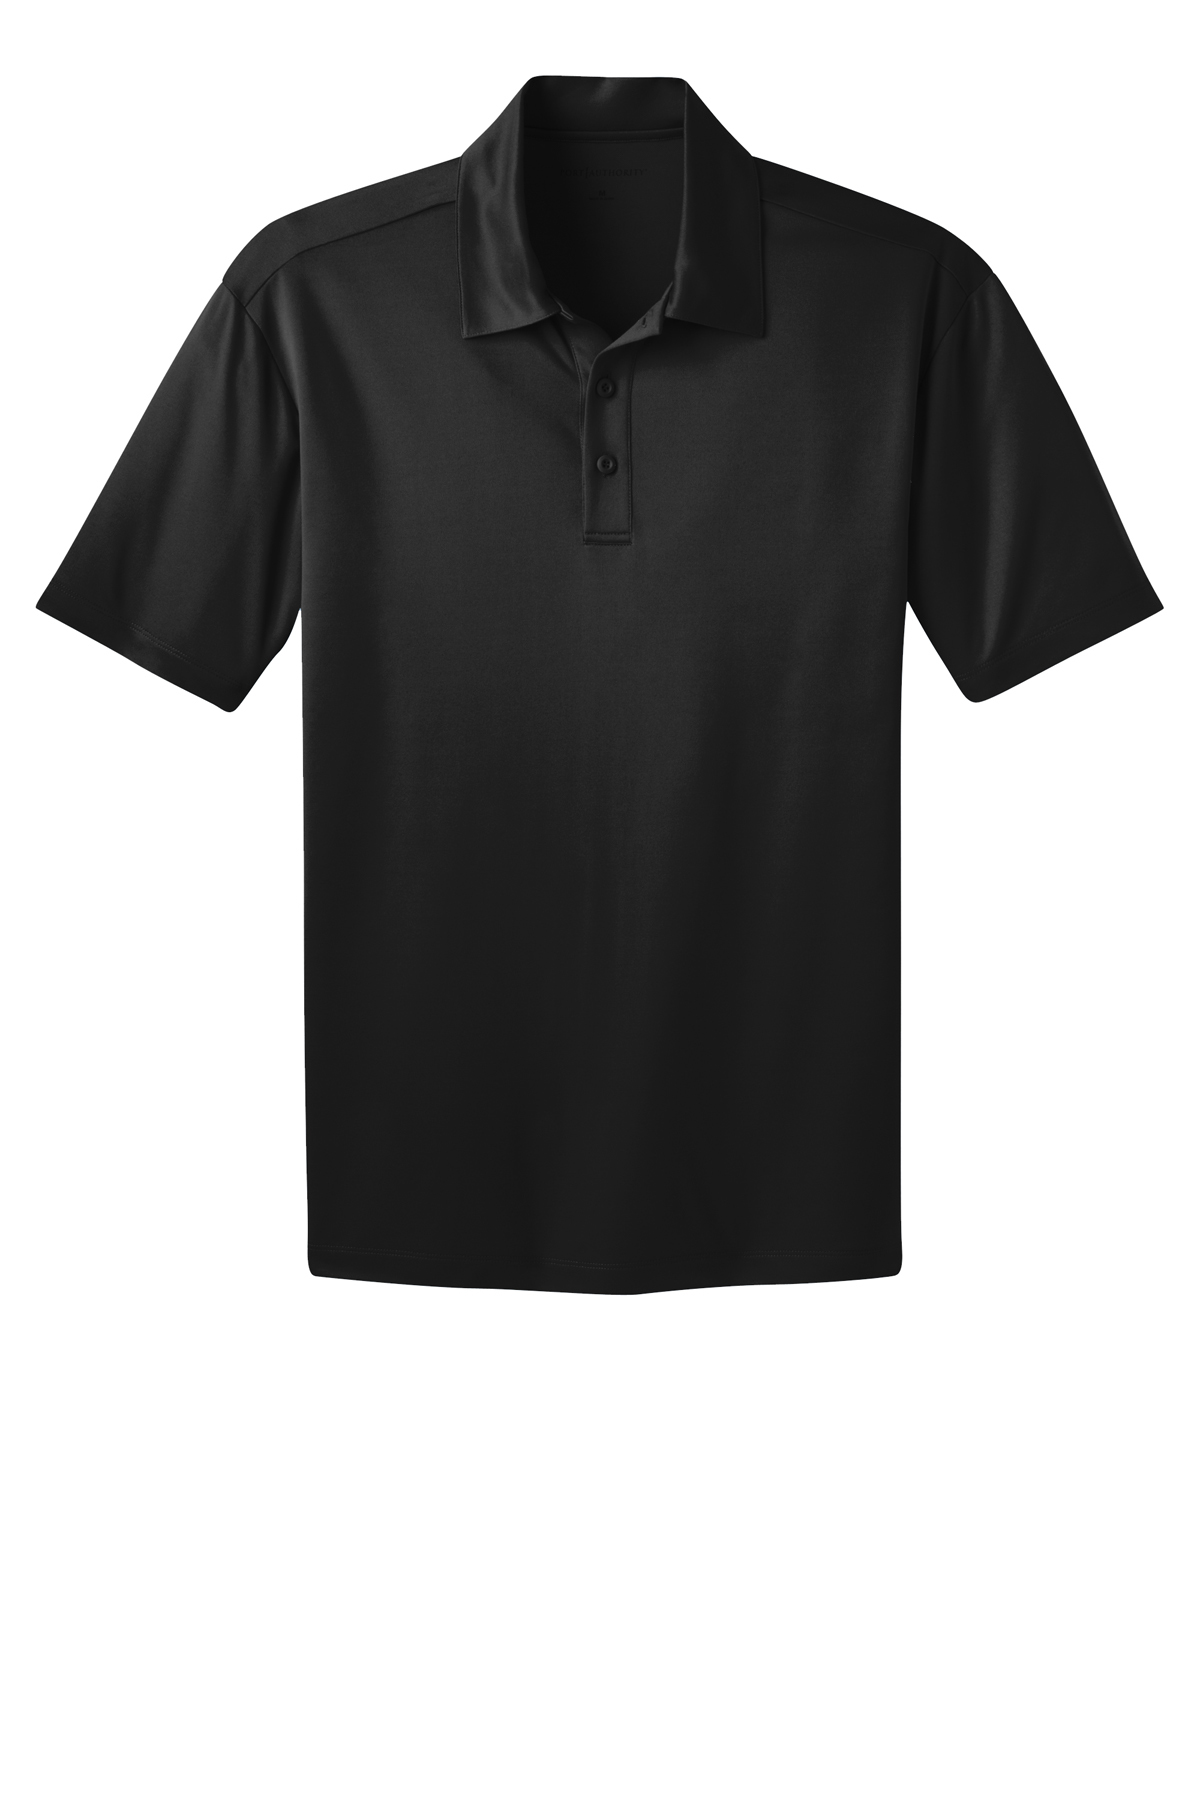 Port Authority Tall Silk Touch™ Performance Polo | Product | Port Authority